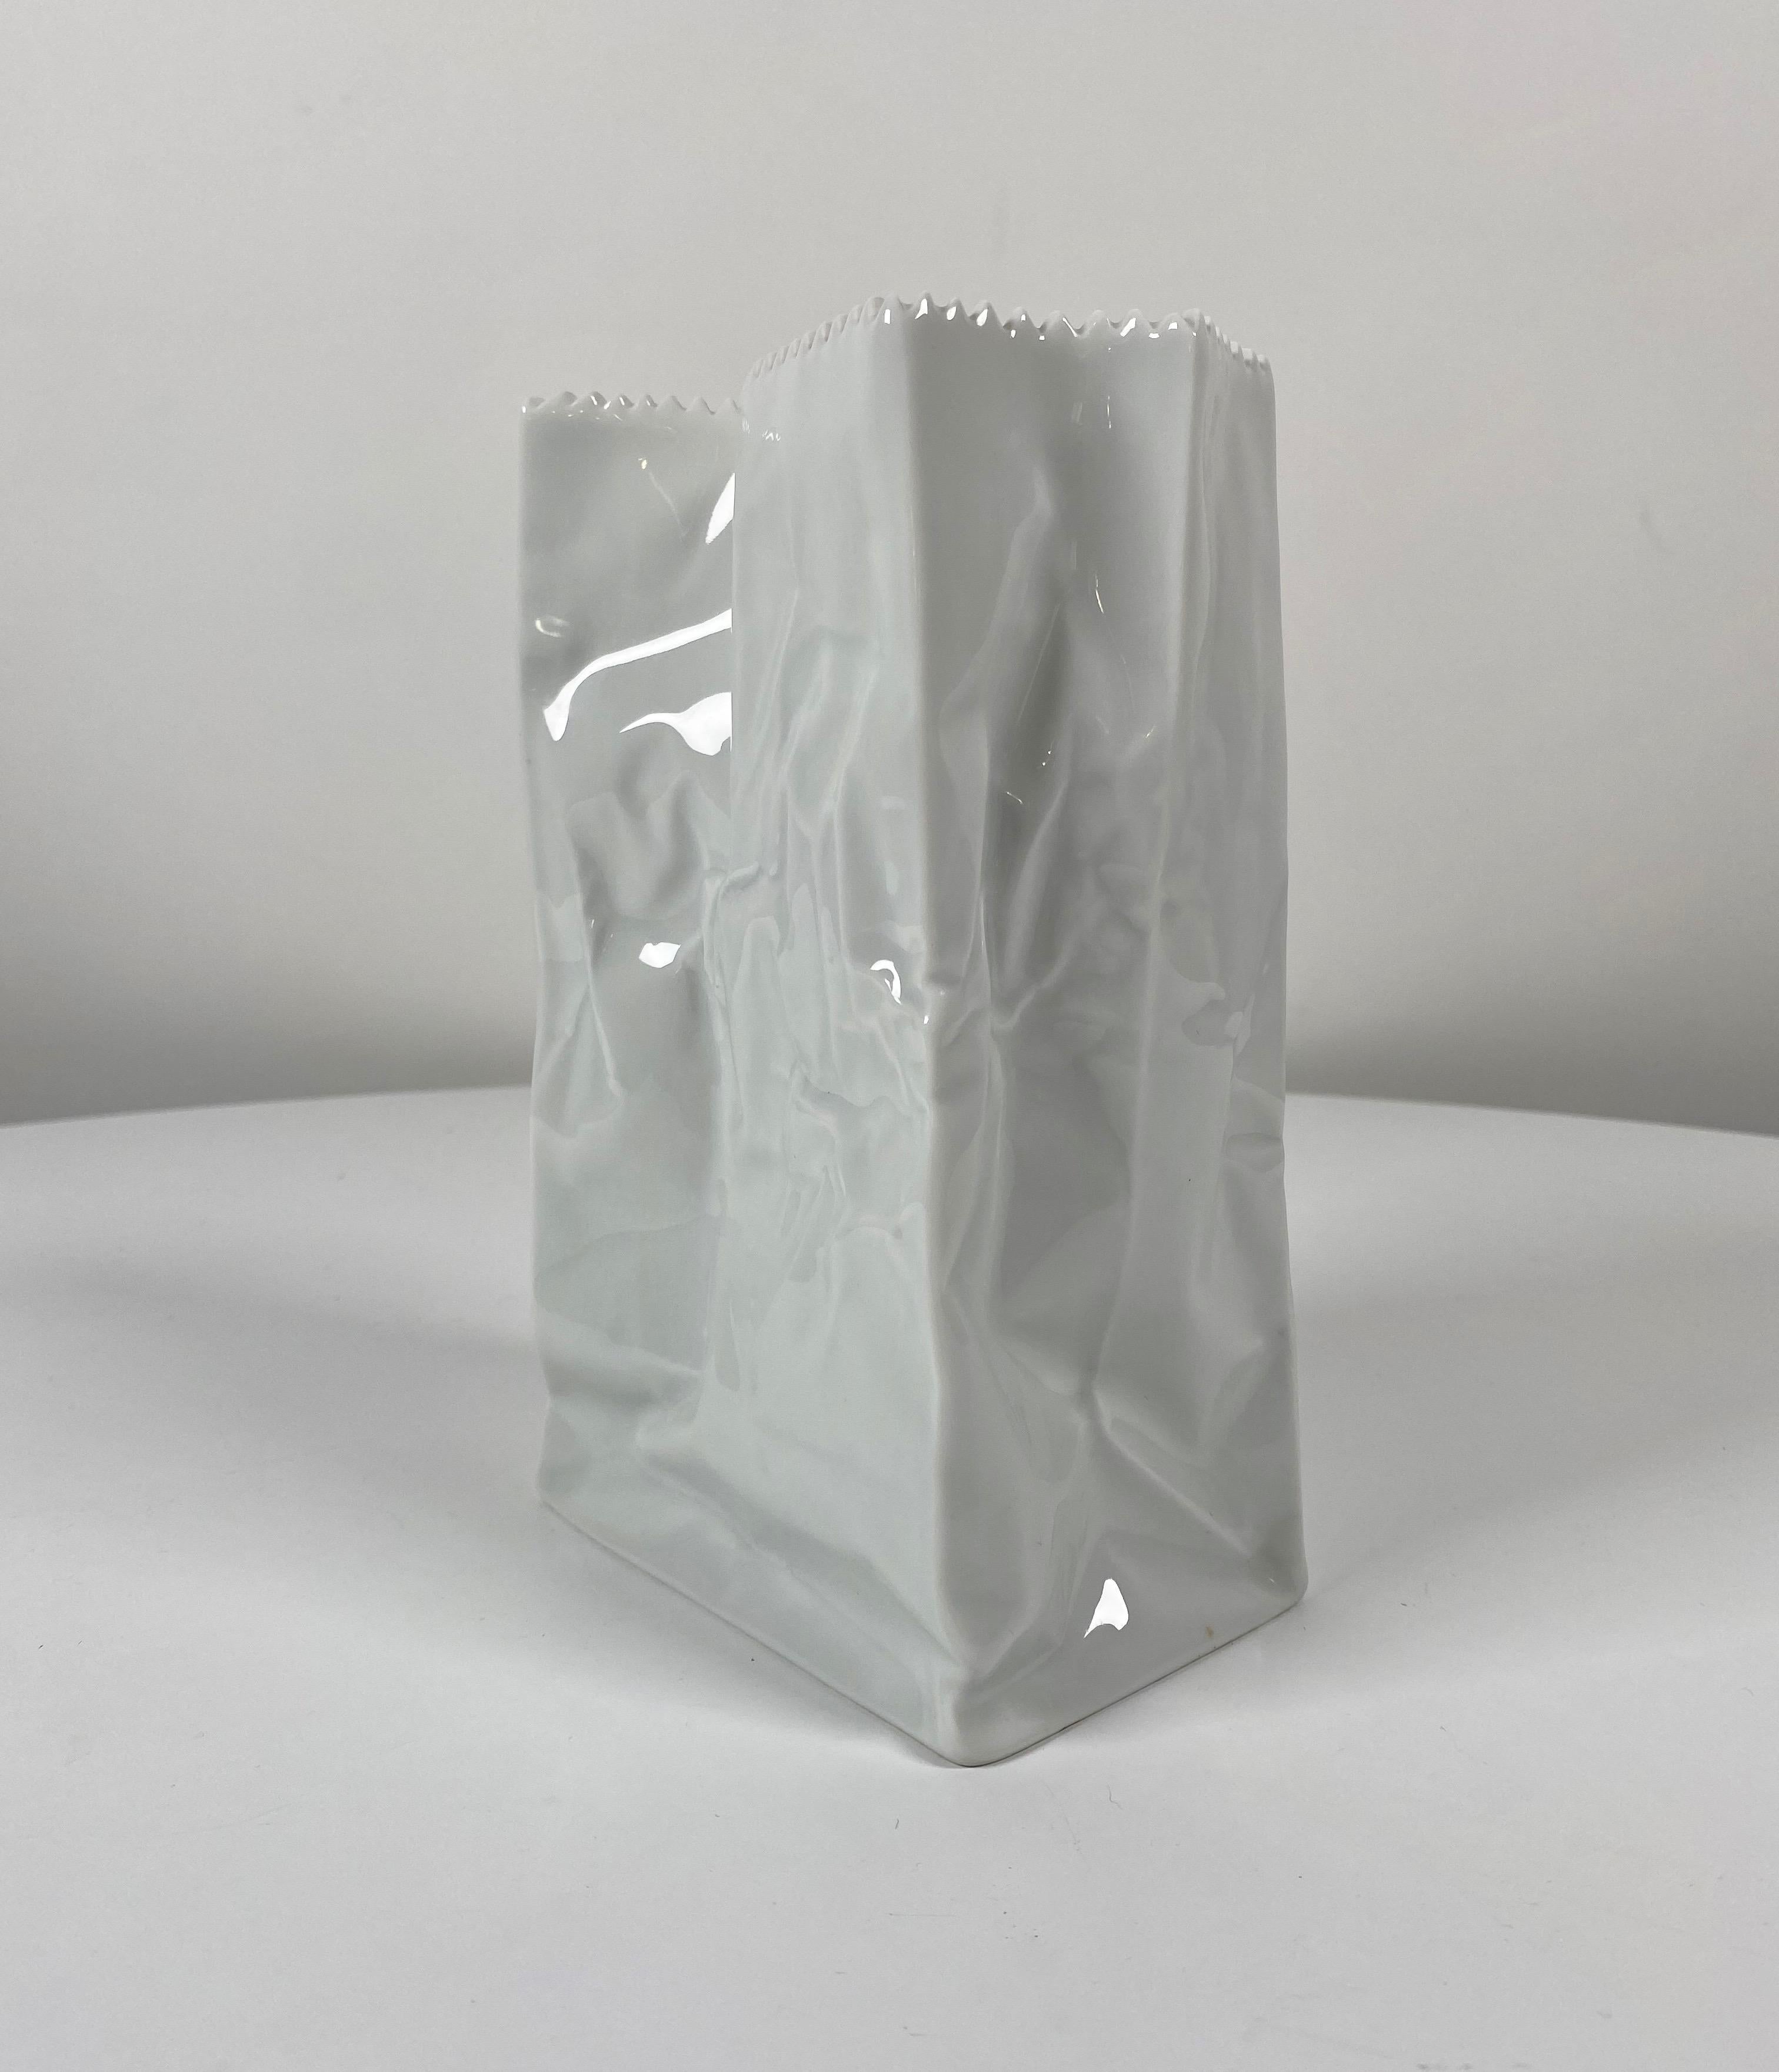 Iconic Finnish designer Tapio Wirkkala (1915-1985) for Rosenthal Studio-Line of Germany ceramic paper bag vase in a white glaze. Made to look like an old paper bag, this vase can be used to hold flowers or just as an object of beauty on a surface.